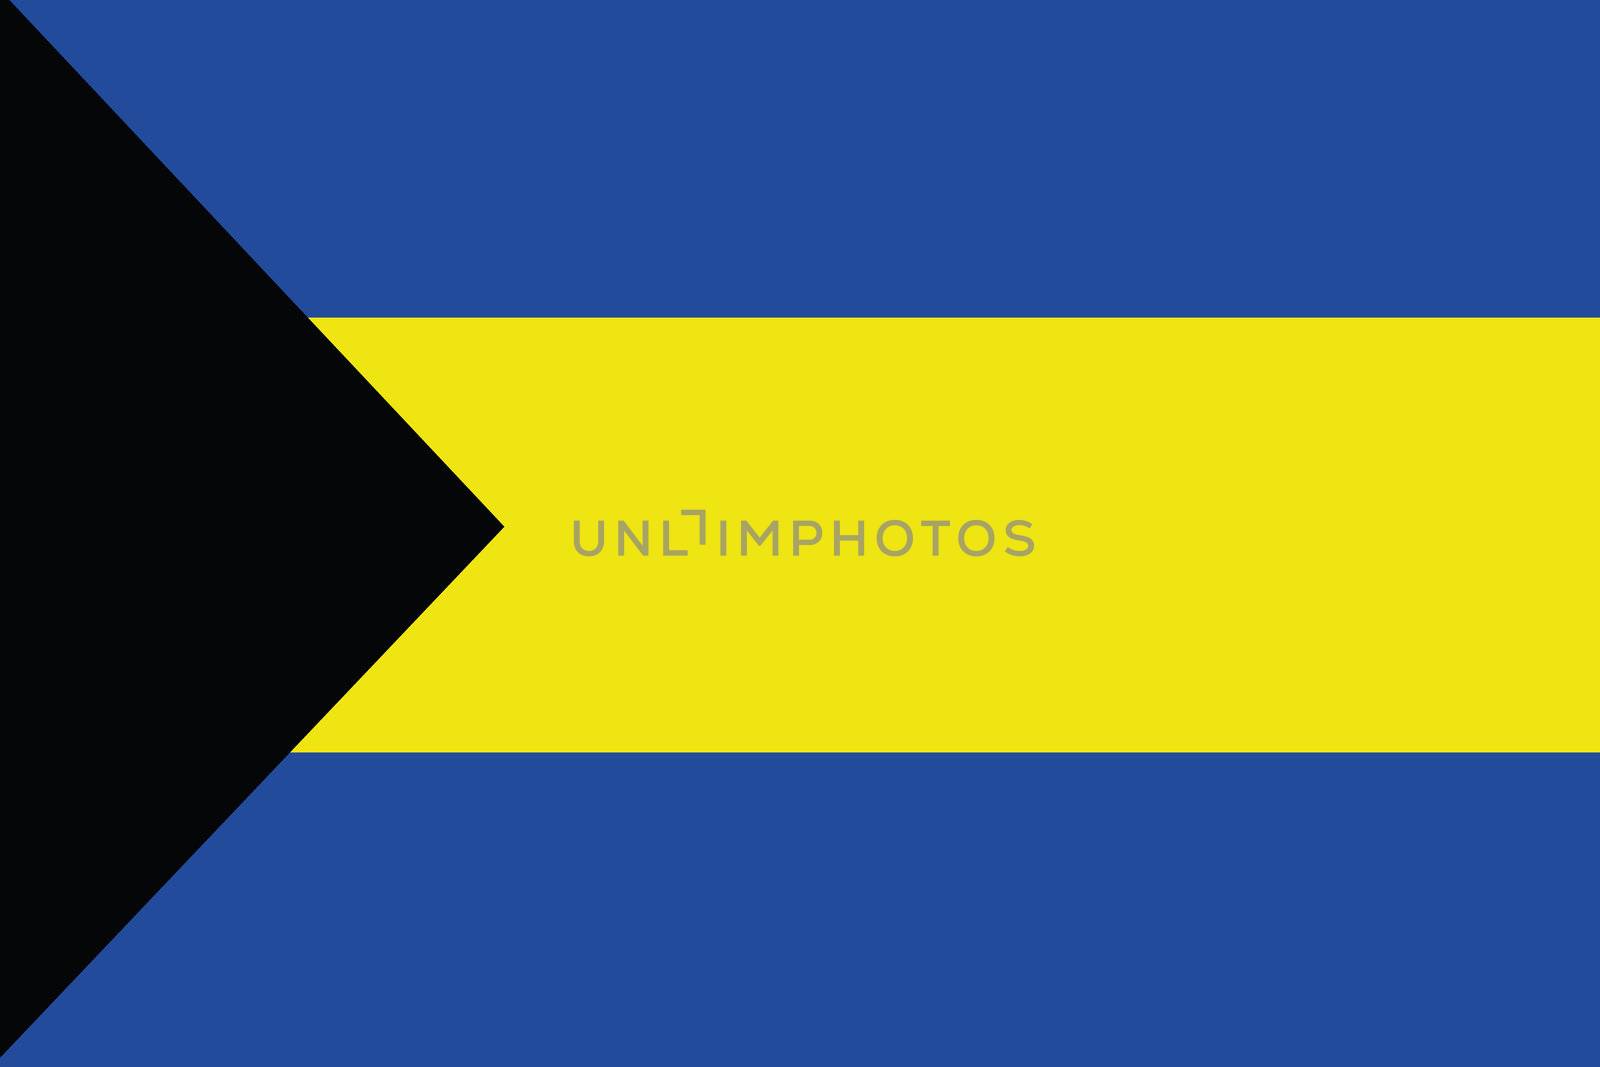 An illustration of the flag of Bahamas